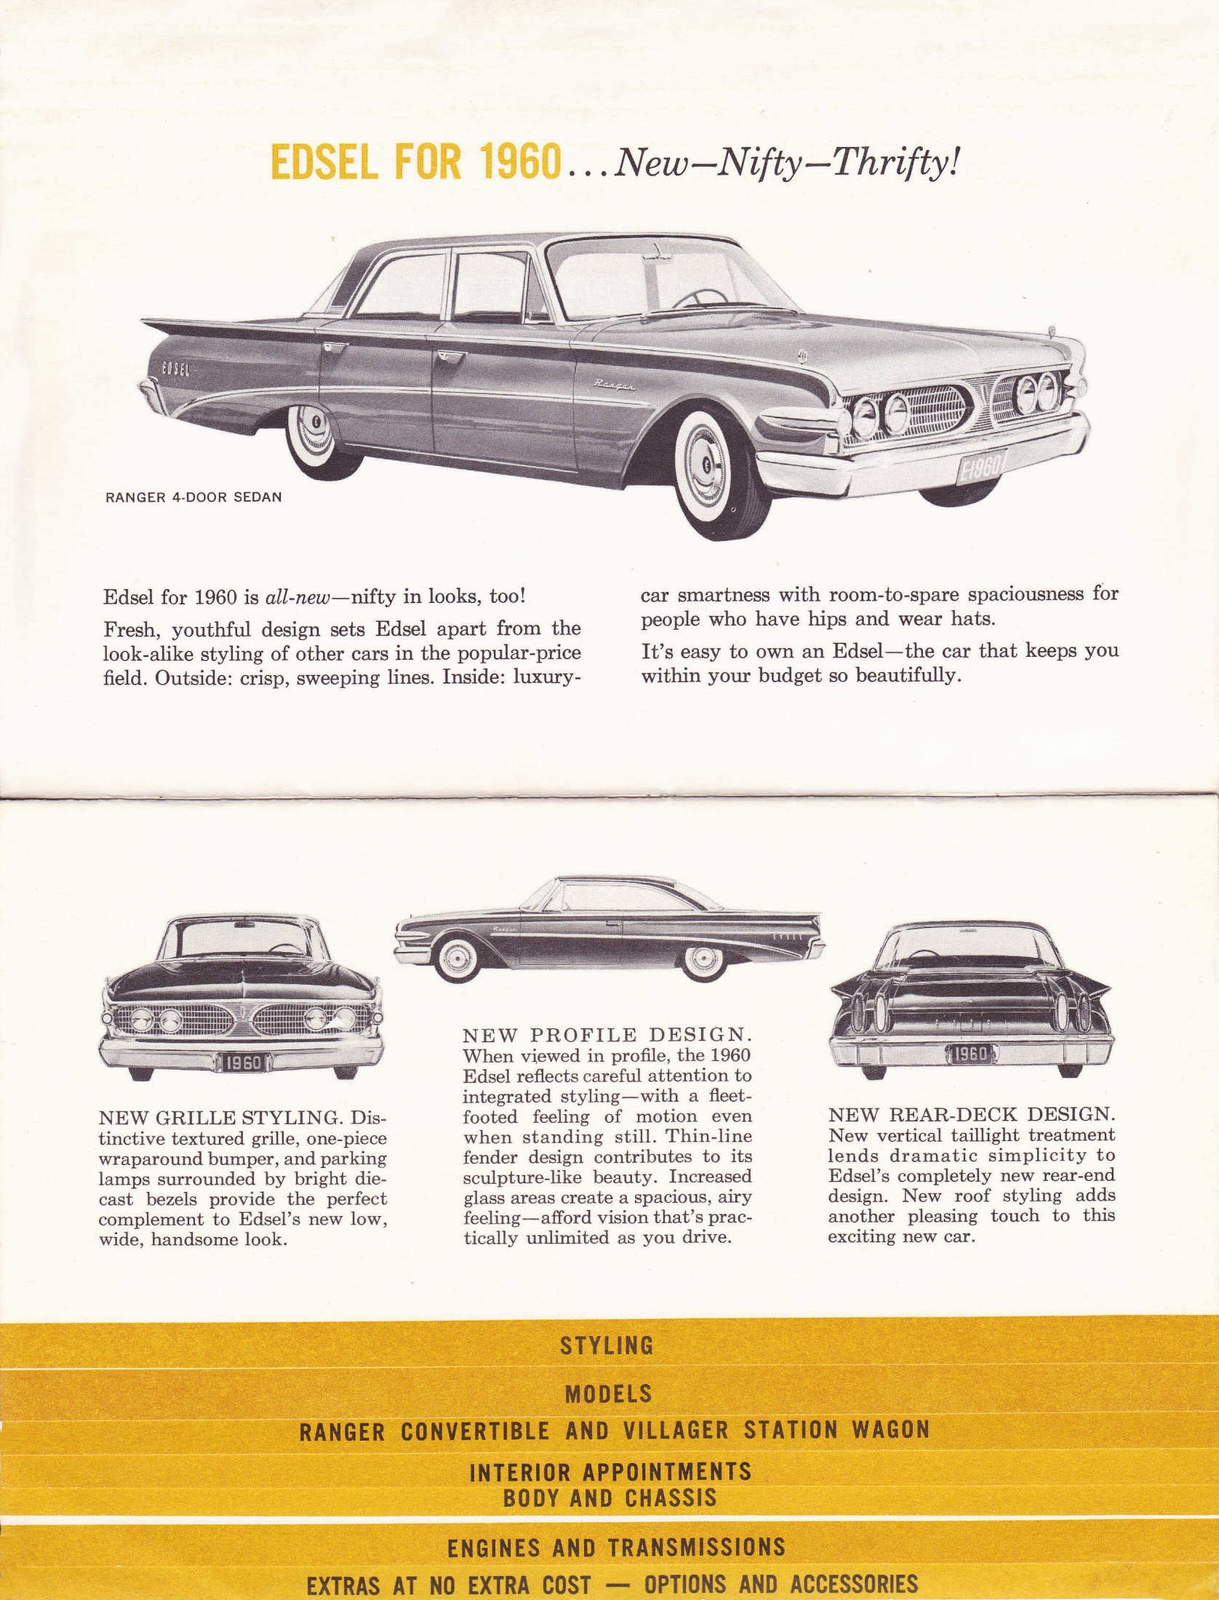 n_1960 Edsel Quick Facts Booklet-02-03.jpg